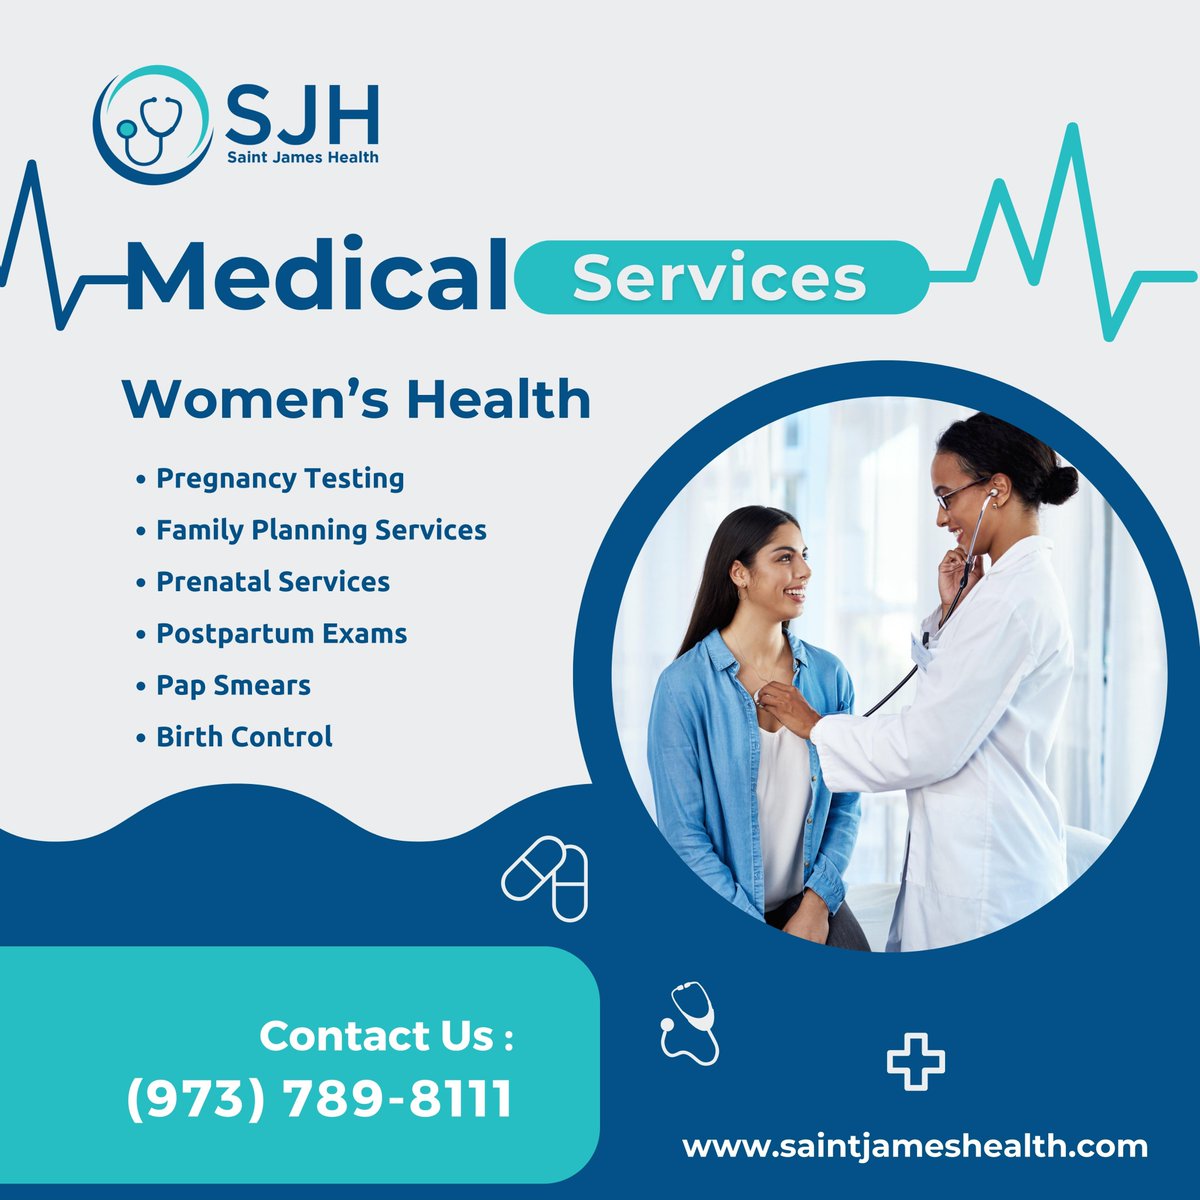 Empowering women through comprehensive medical health services at Saint James Health. Your well-being is our priority. 

#SaintJamesHealth #WomenHealth #HealthForHer #EmpowerWomen #HealthcareForHer #HealthServices #SaintJamesCare #NewarkHealth #NewarkNJ #HealthCenter #OBGYN